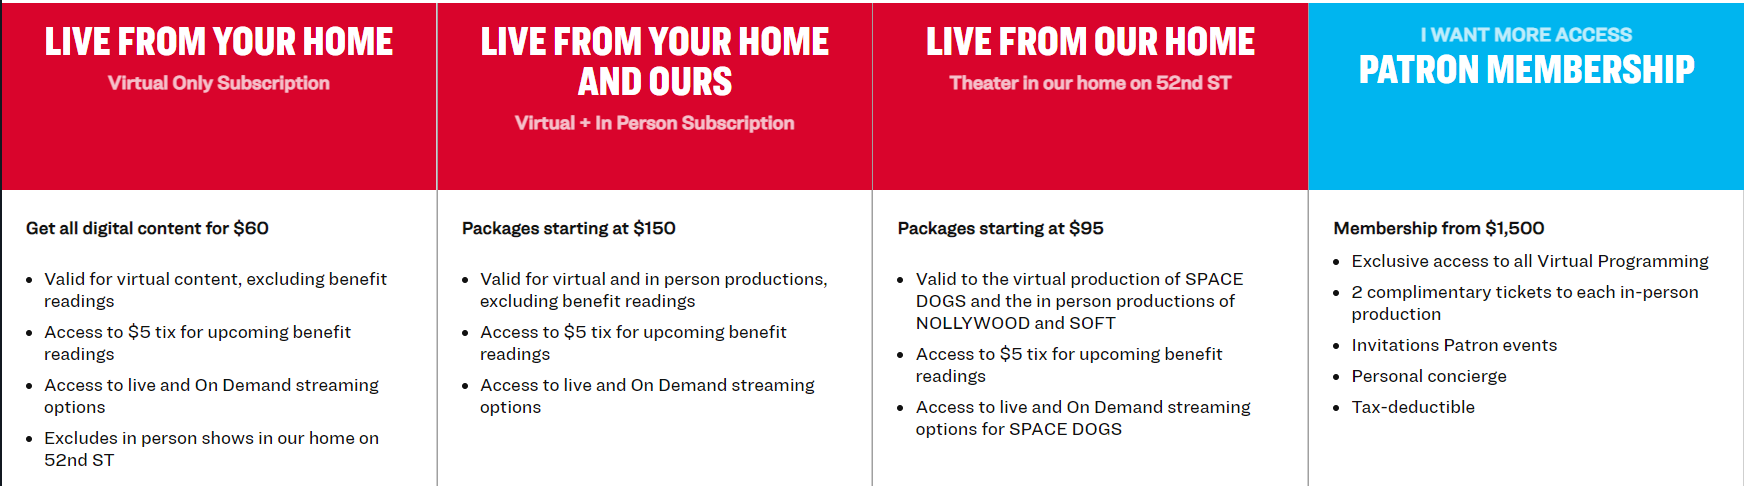 A range of subscription options at MCC Theater, clearly outlining the price and benefits of each of four options.